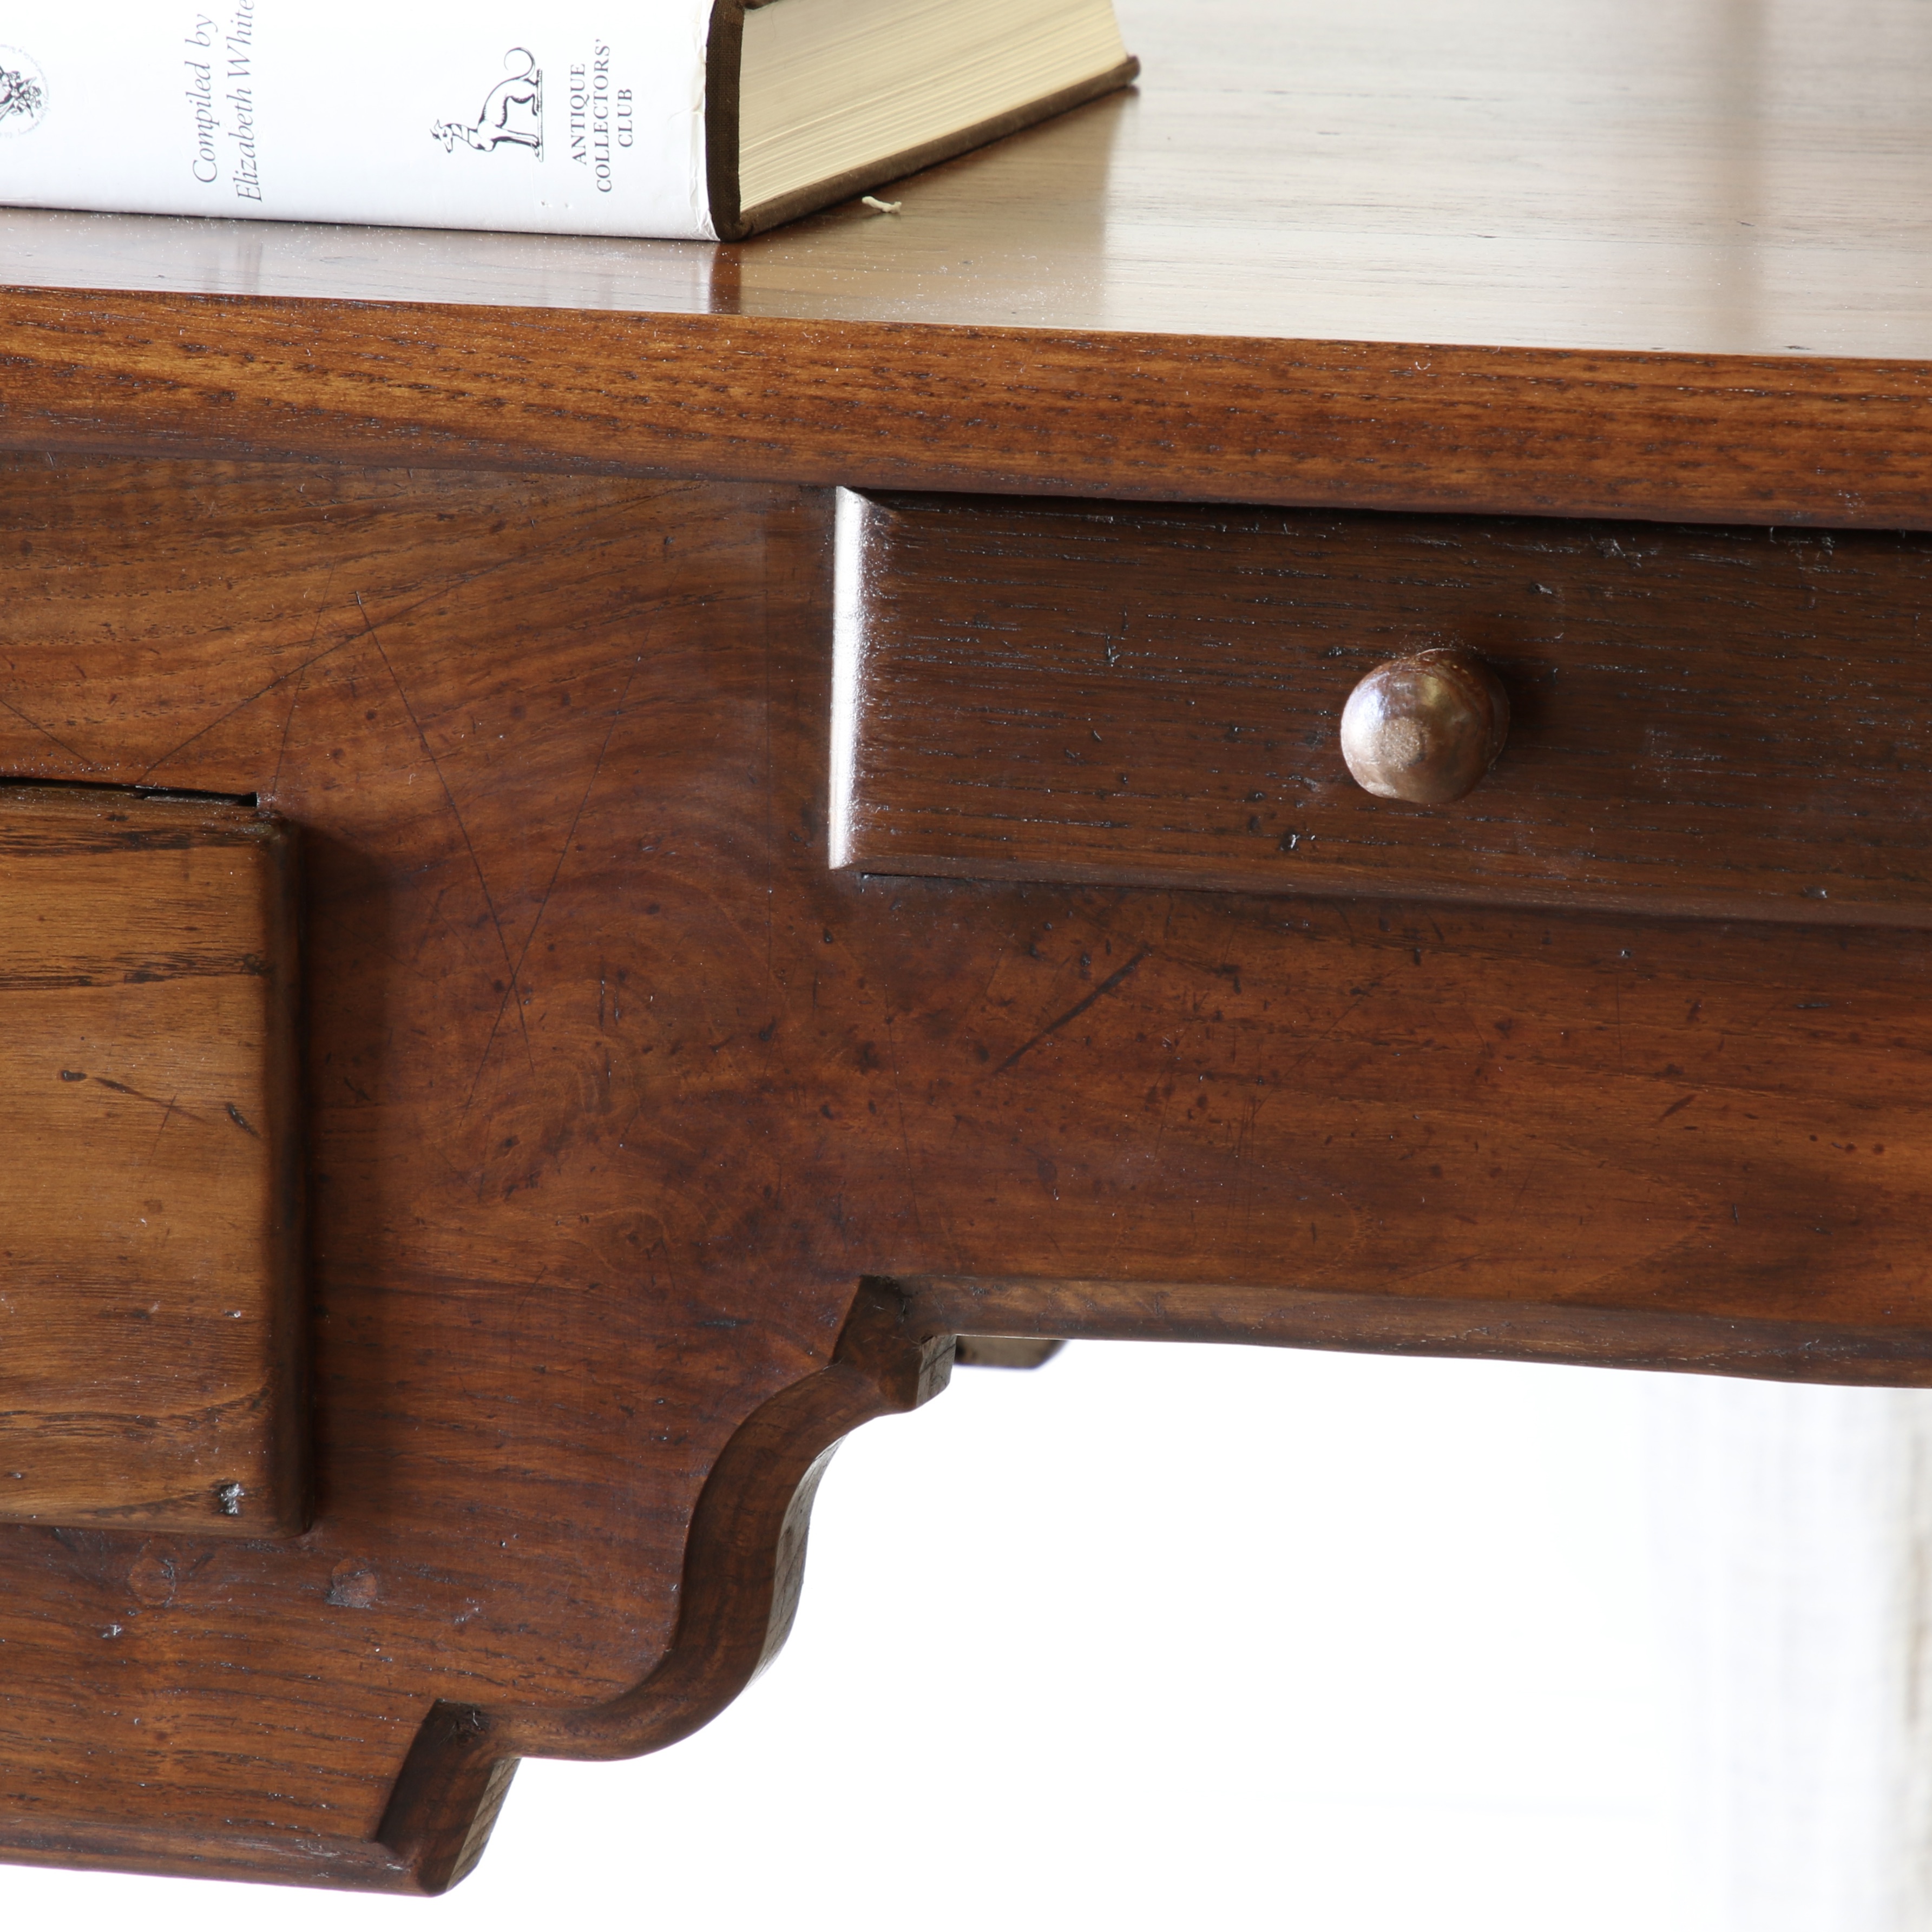 French Provincial Three Drawer Side Table